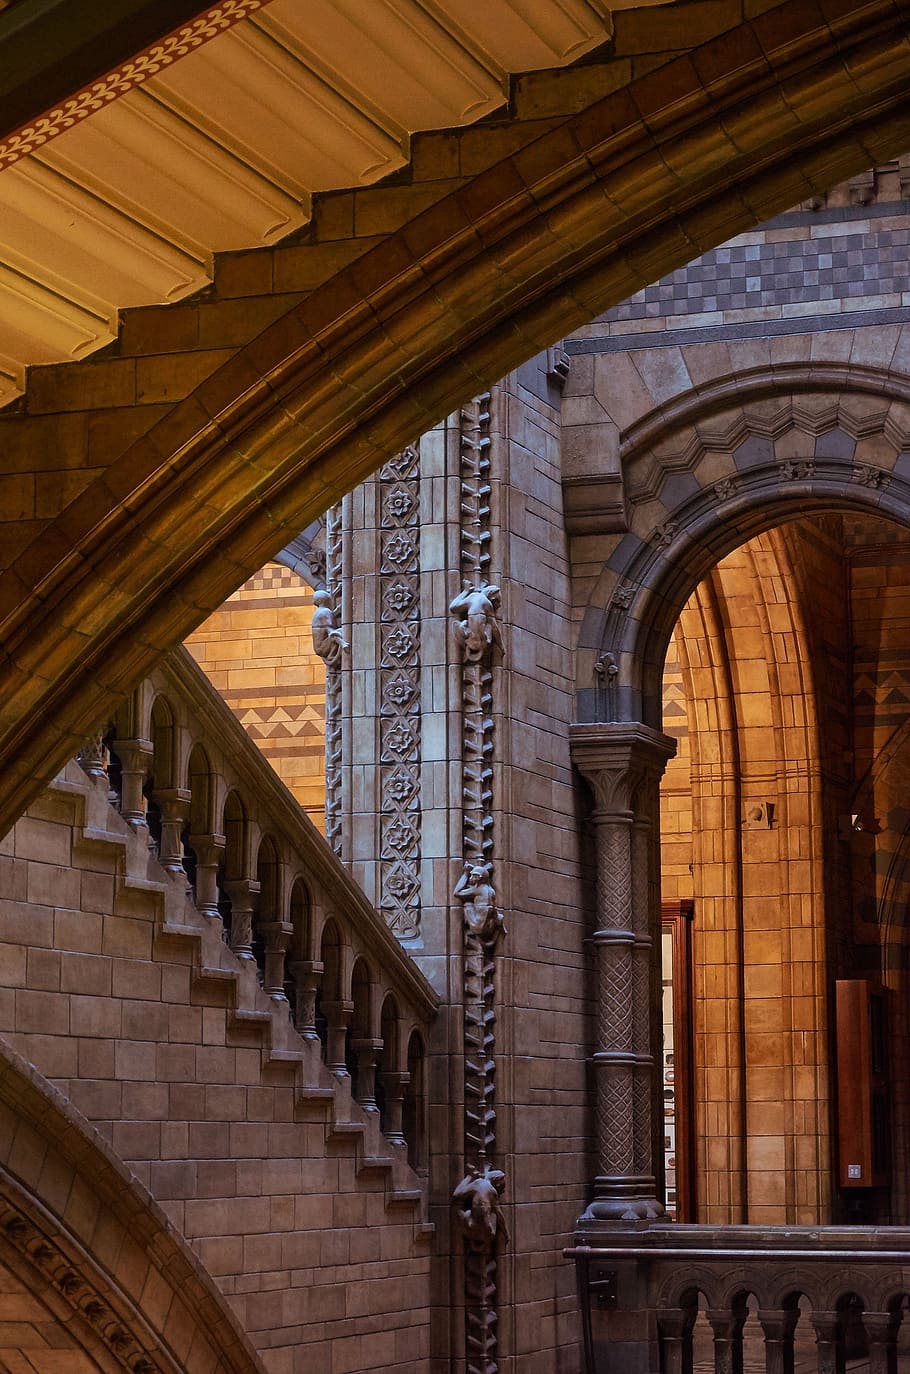 brown, gray, concrete, hall, natural history museum, london, staircase, interior view, architecture, building